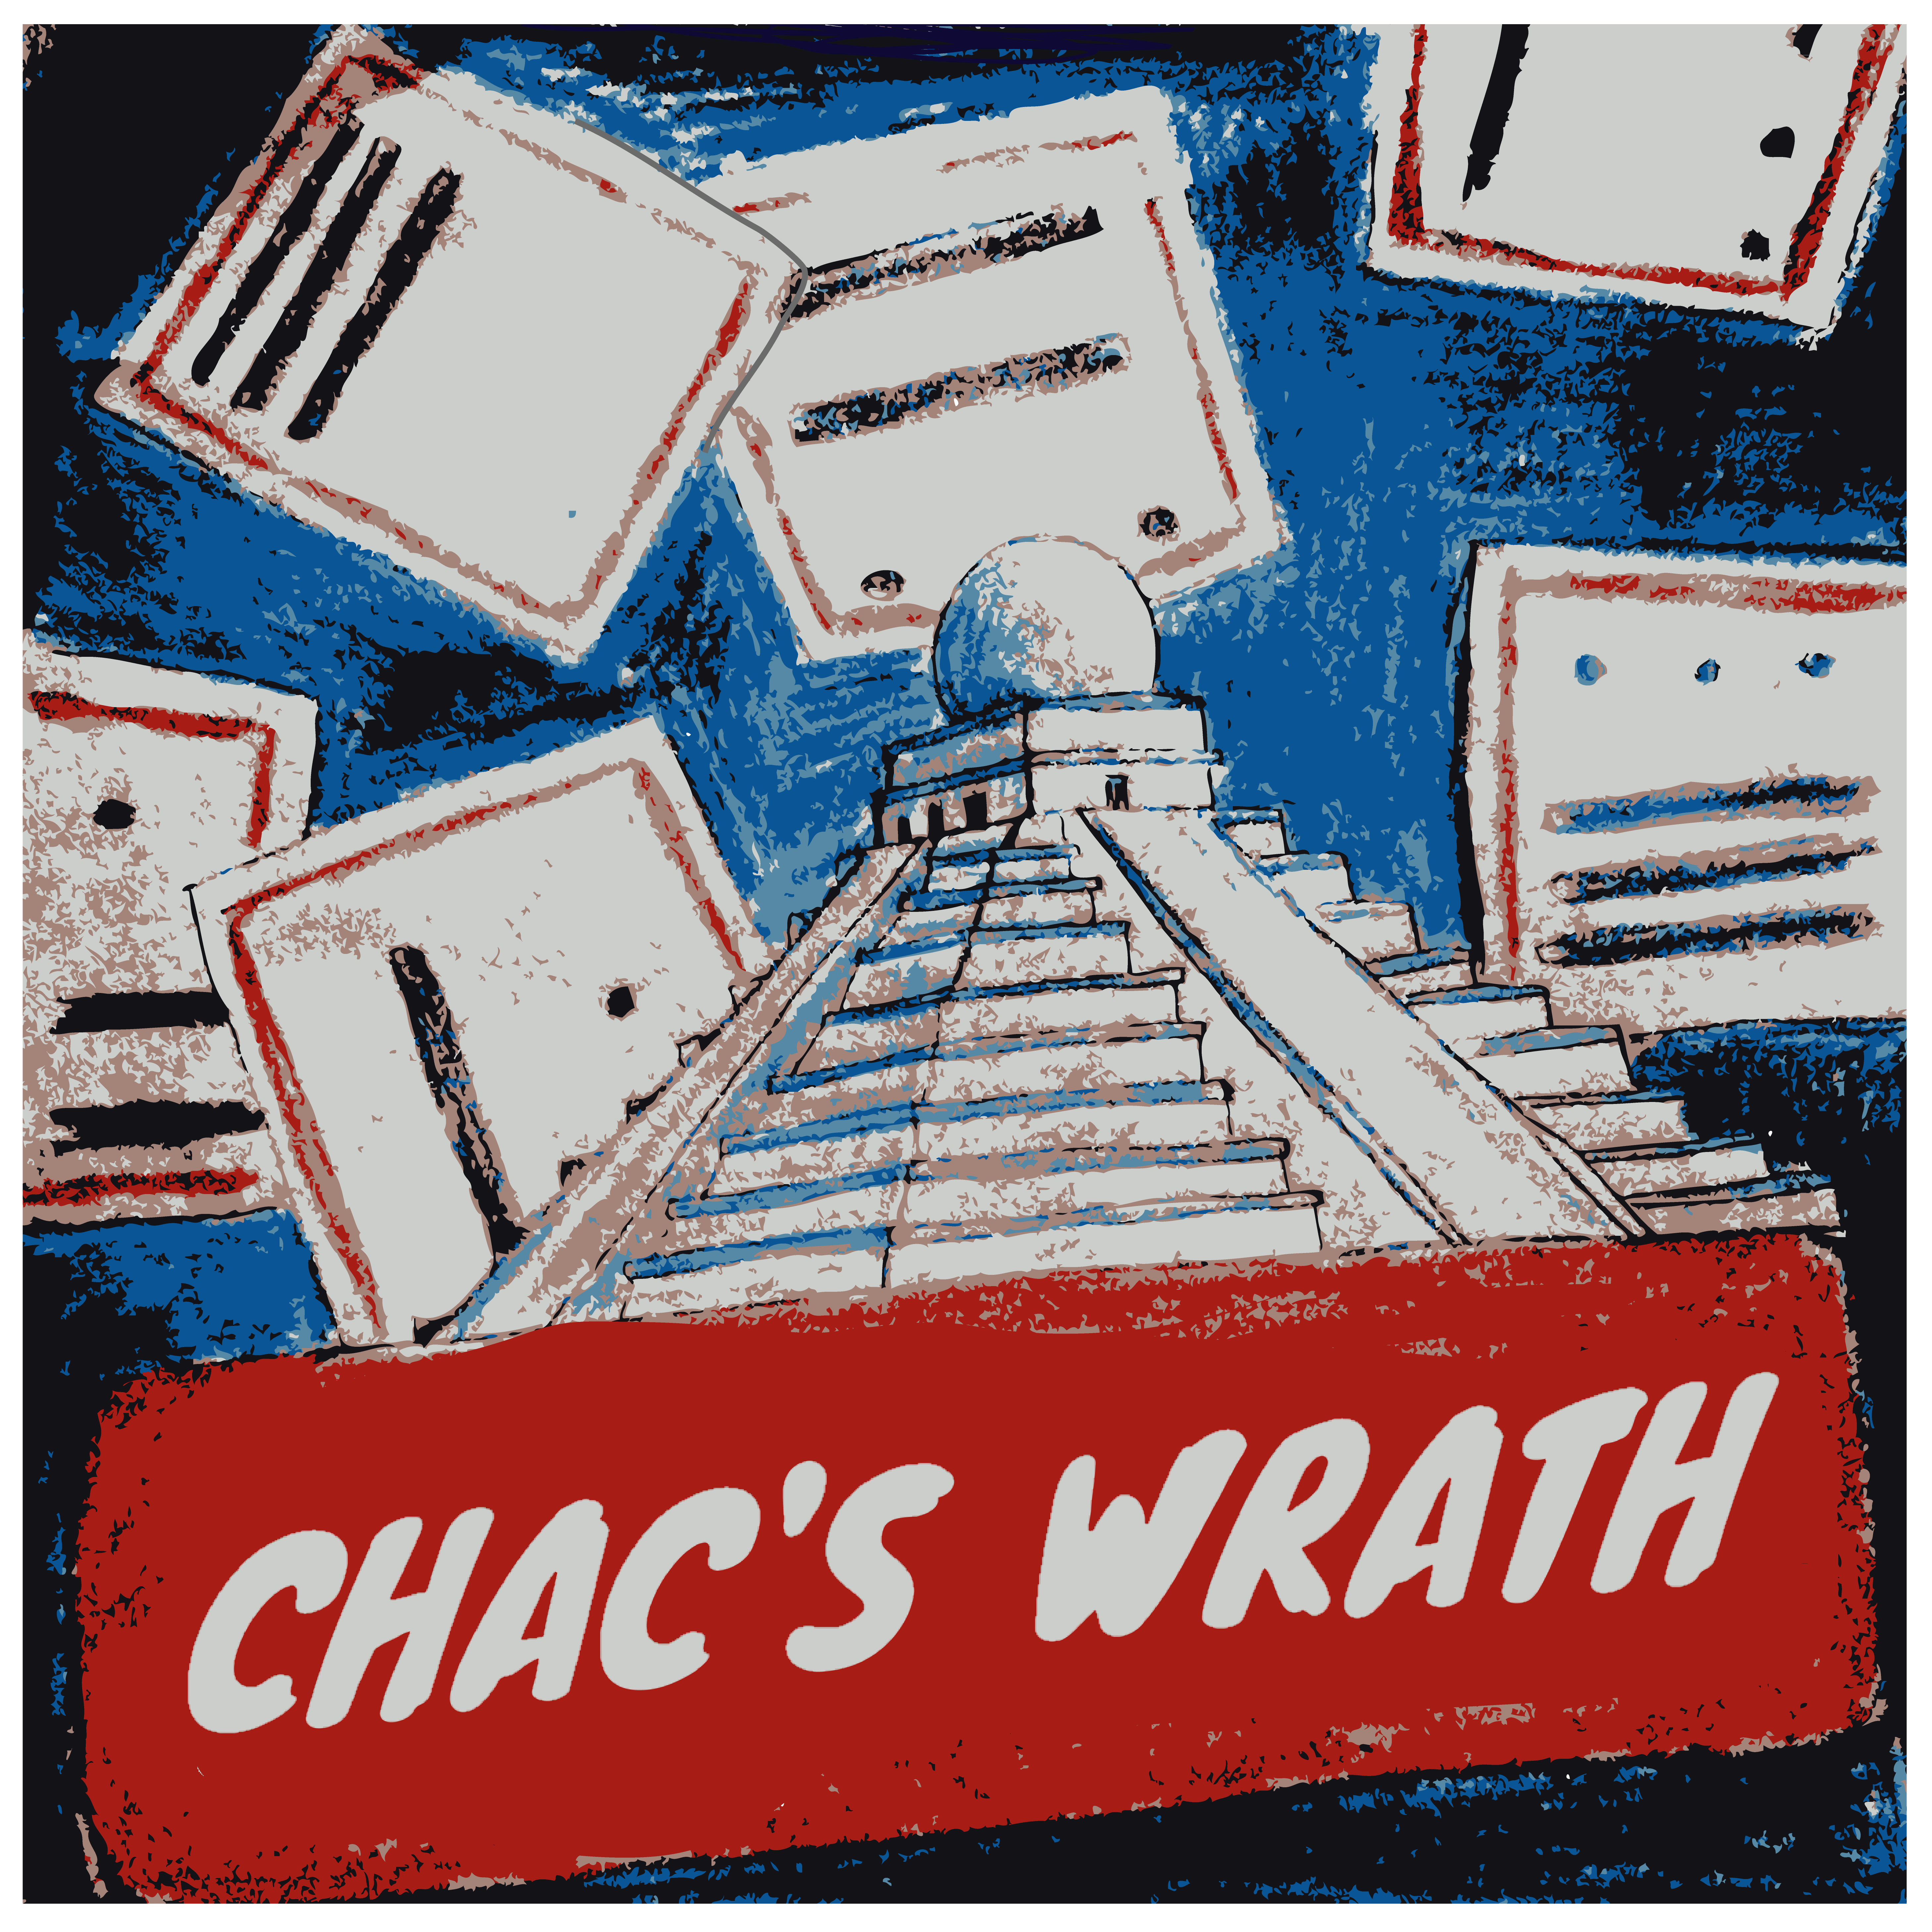 Episode 2 – Chac’s Wrath